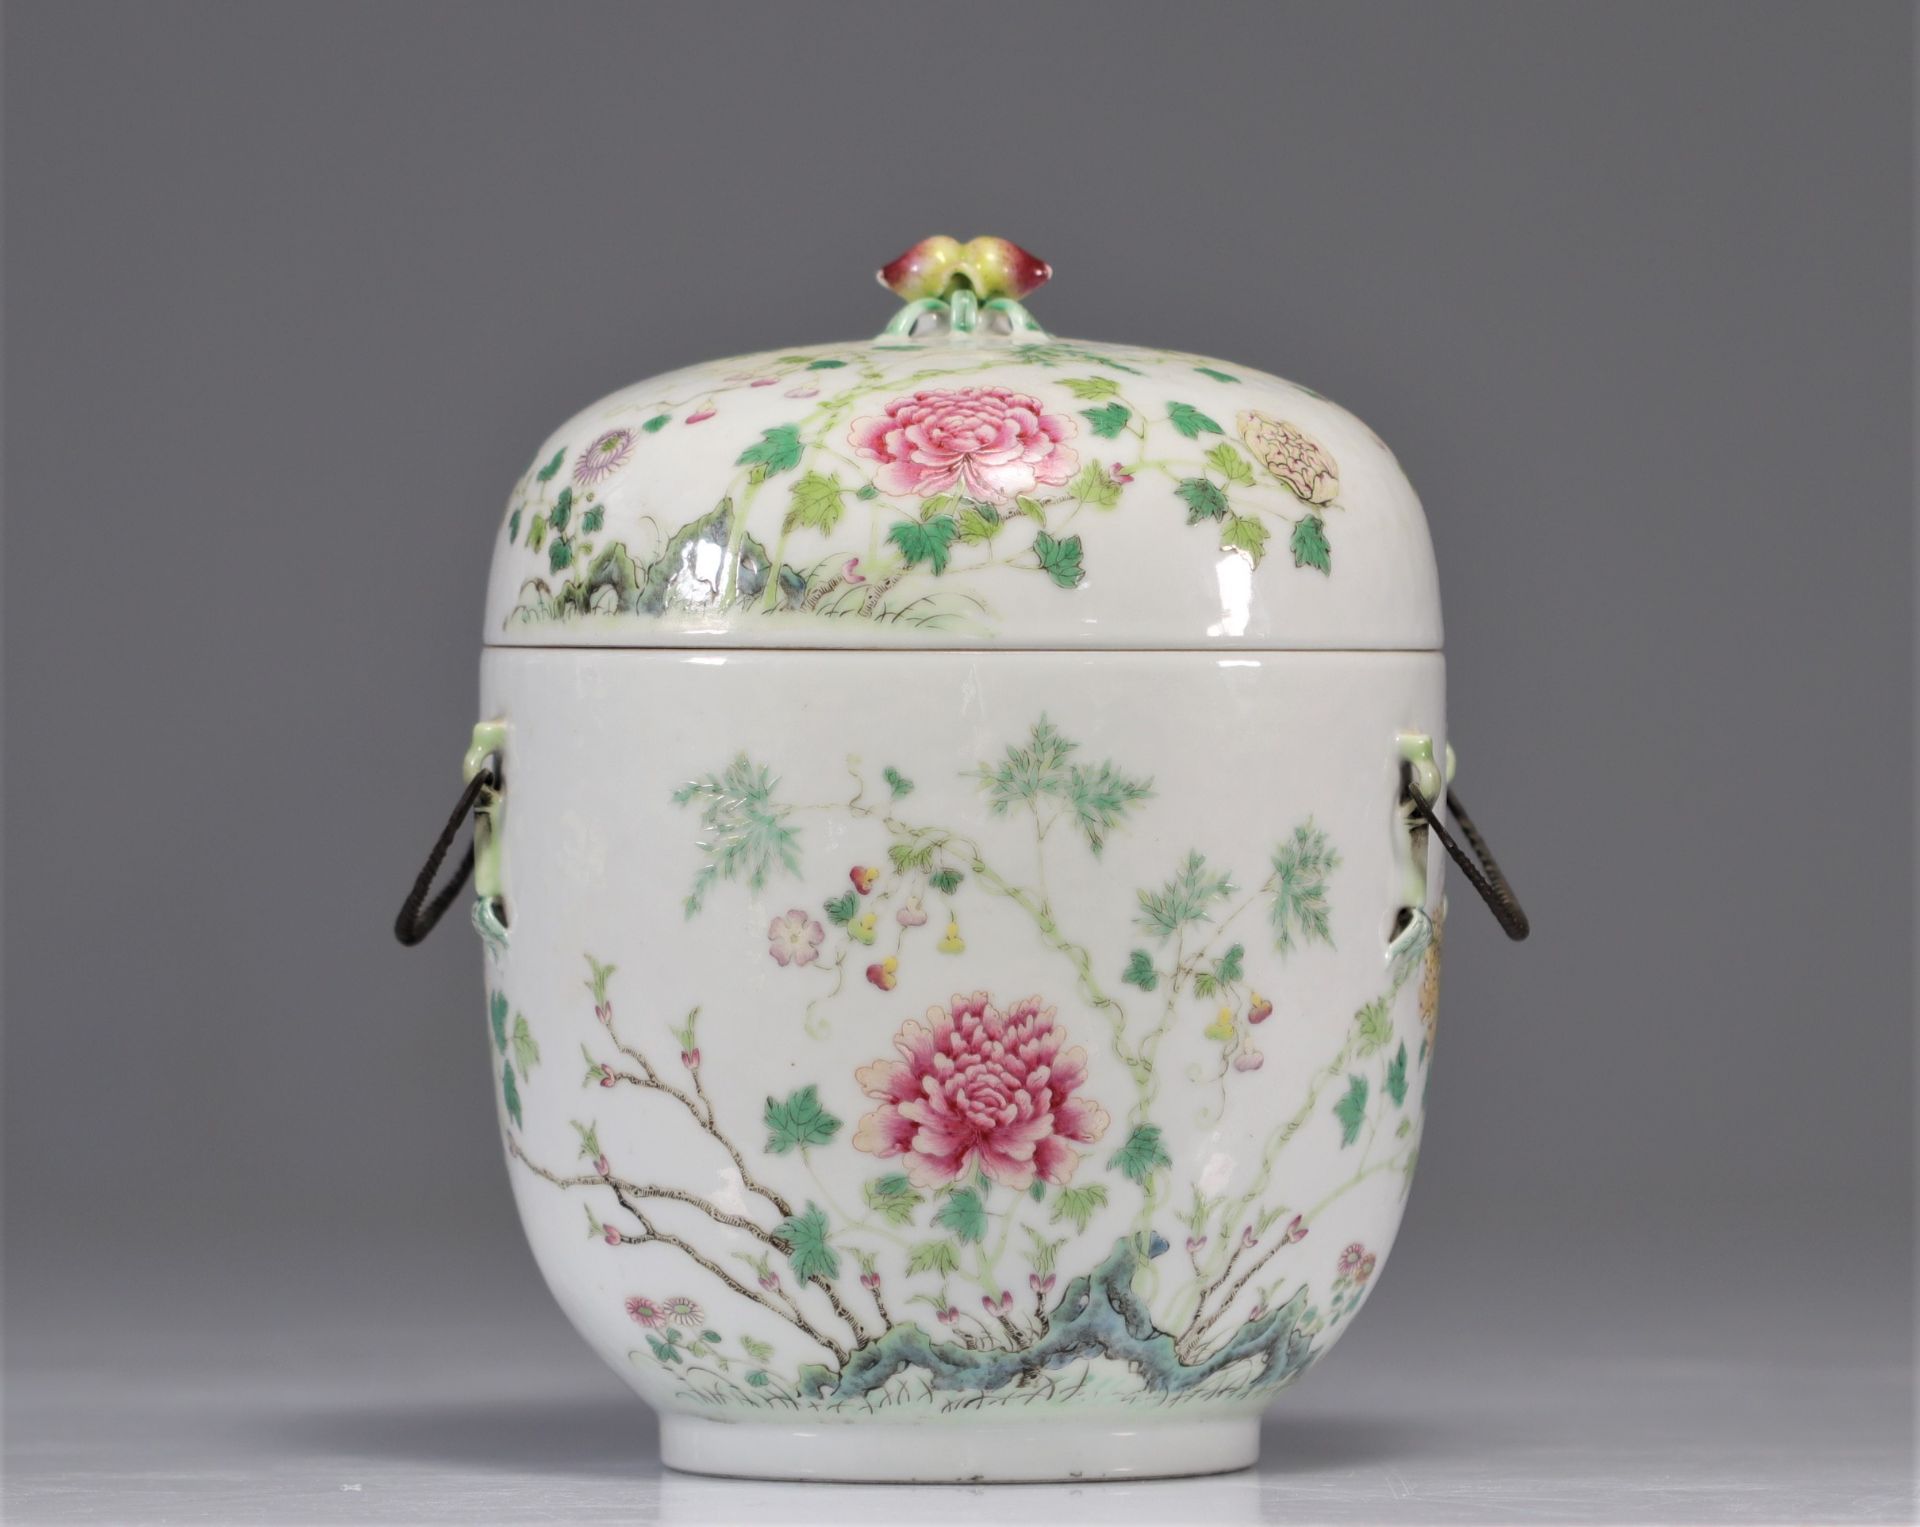 Famille rose porcelain tureen with very fine flower decoration from 19th century